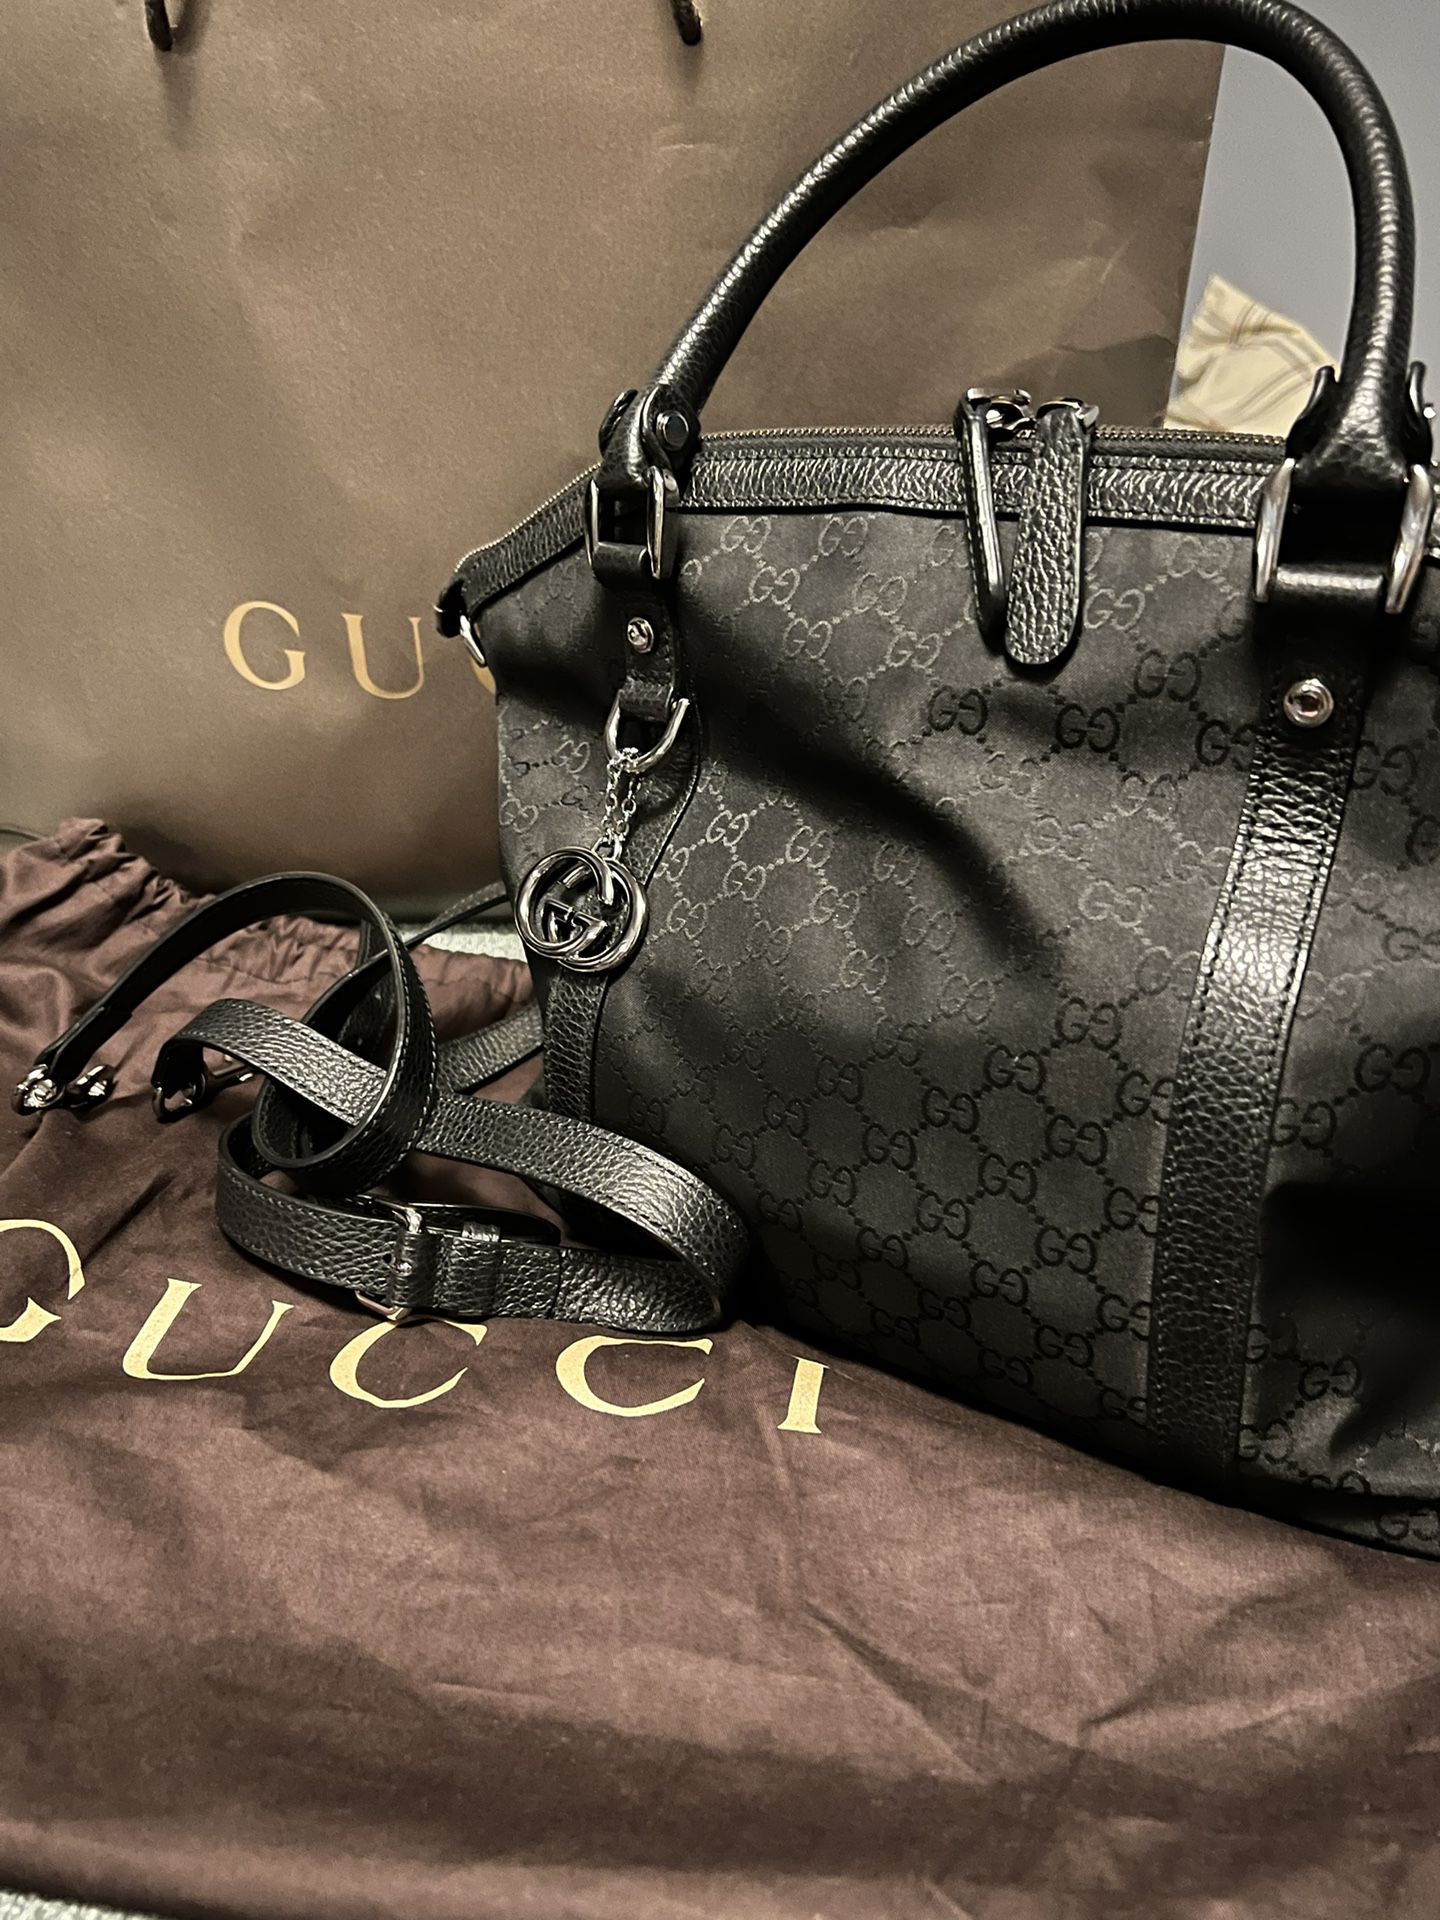 GUCCI TWO WAY TOTE CANVASS